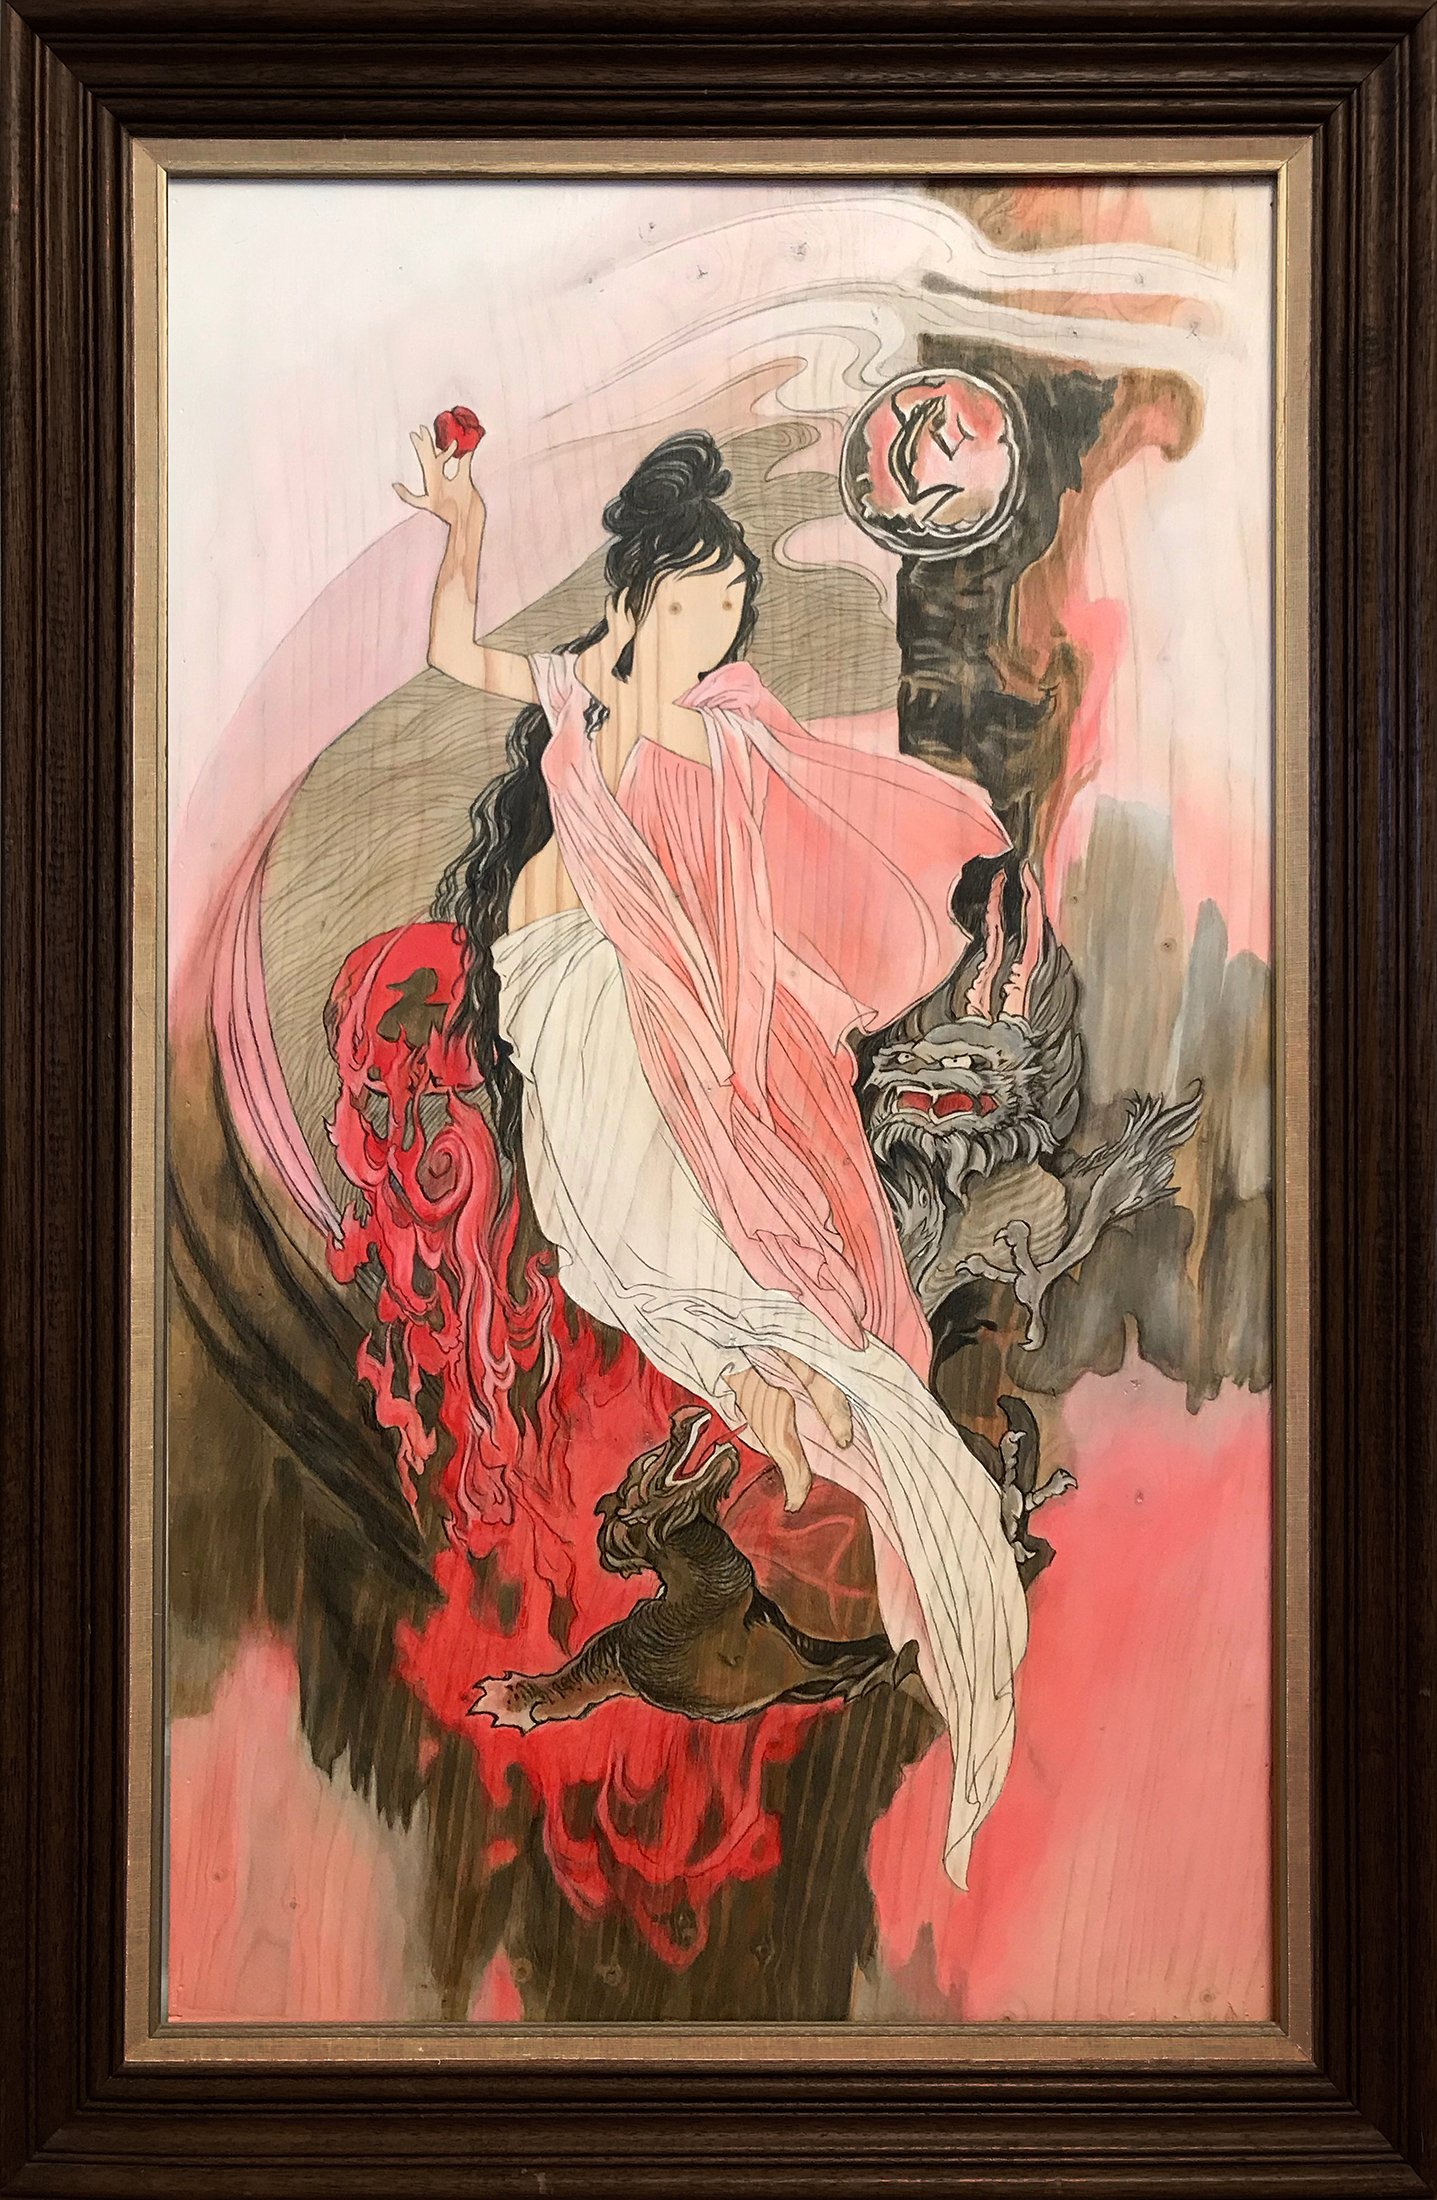 LCharters_From The Missing Women Series, Sanchuan's Goddess Patches Sky Muse.jpg